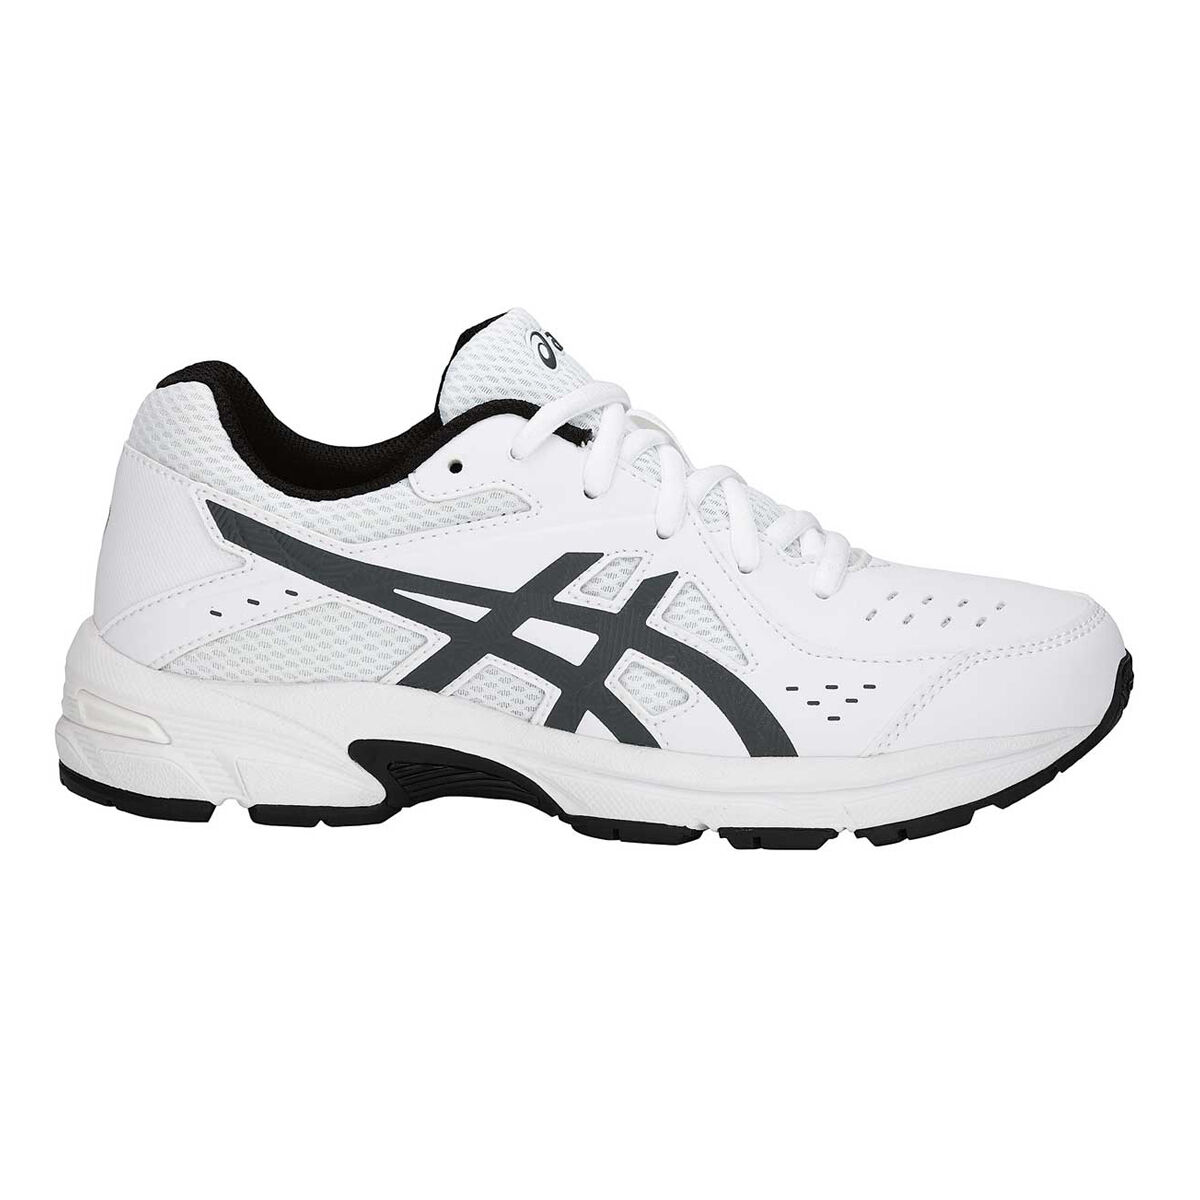 asics leather running shoes